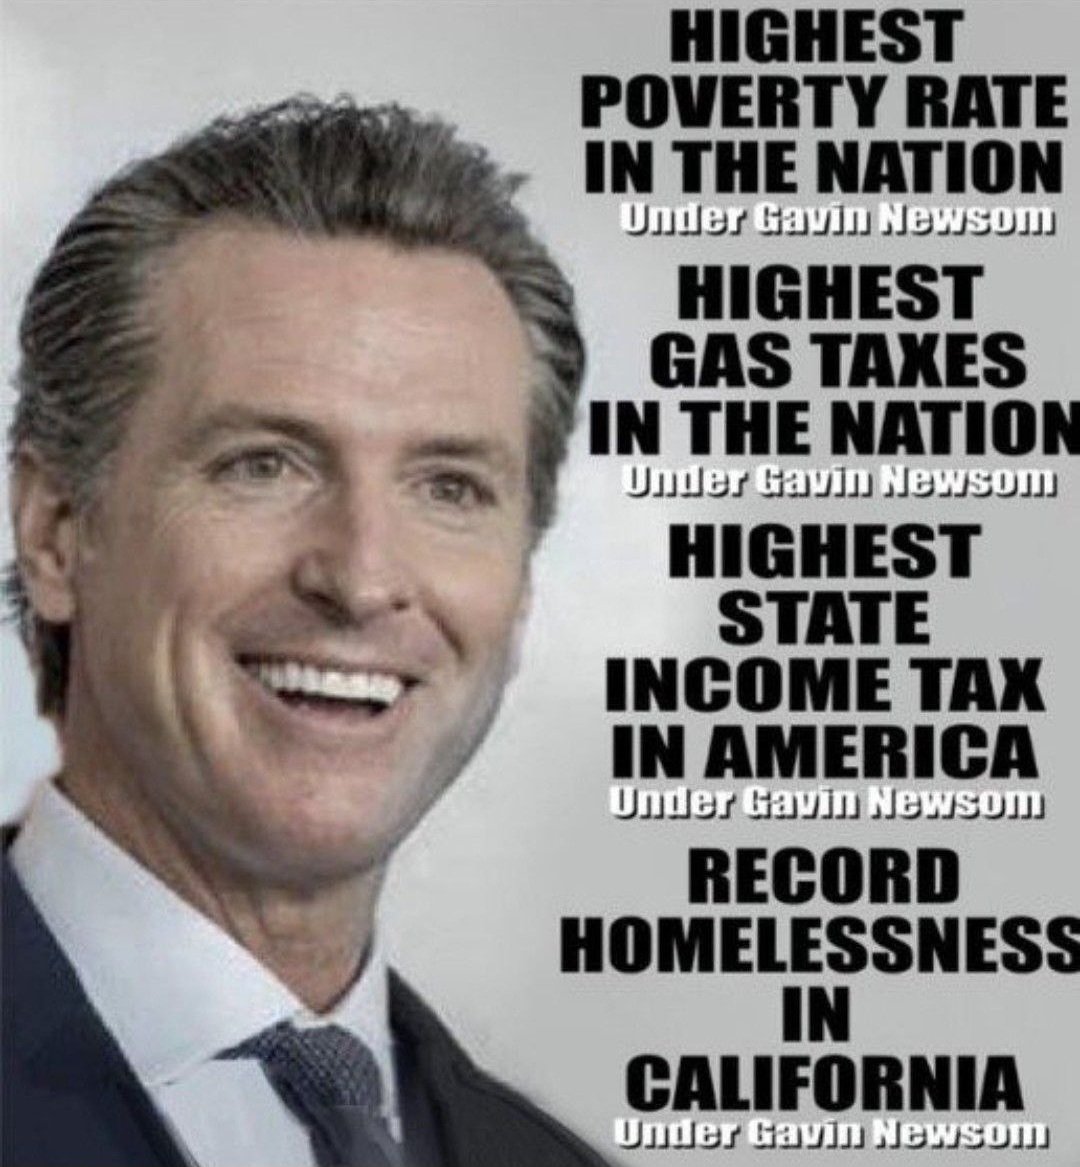 I don't think anybody could be worse than the current resident at the White House, but Newsom would be a close second.